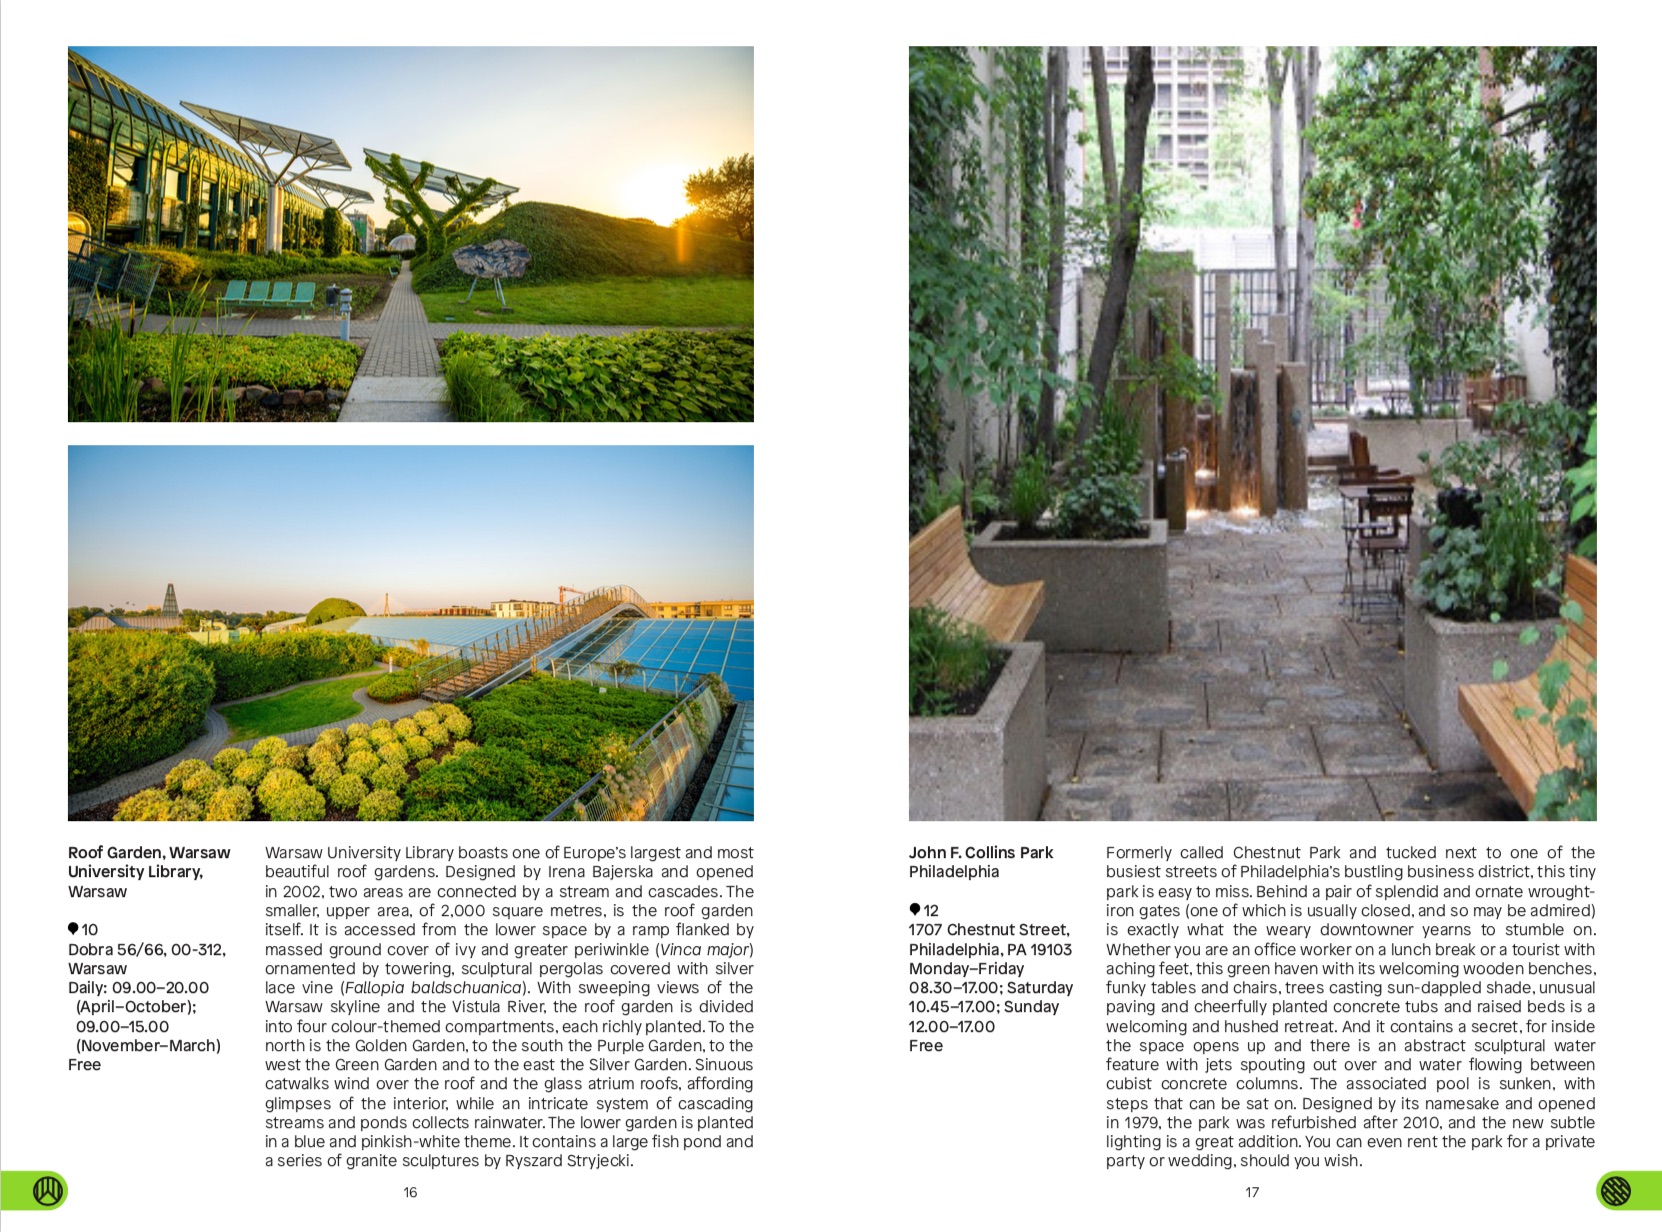 By Toby Musgrave from Green Escapes: The Guide to Secret Urban Gardens copyright Phaidon 2018